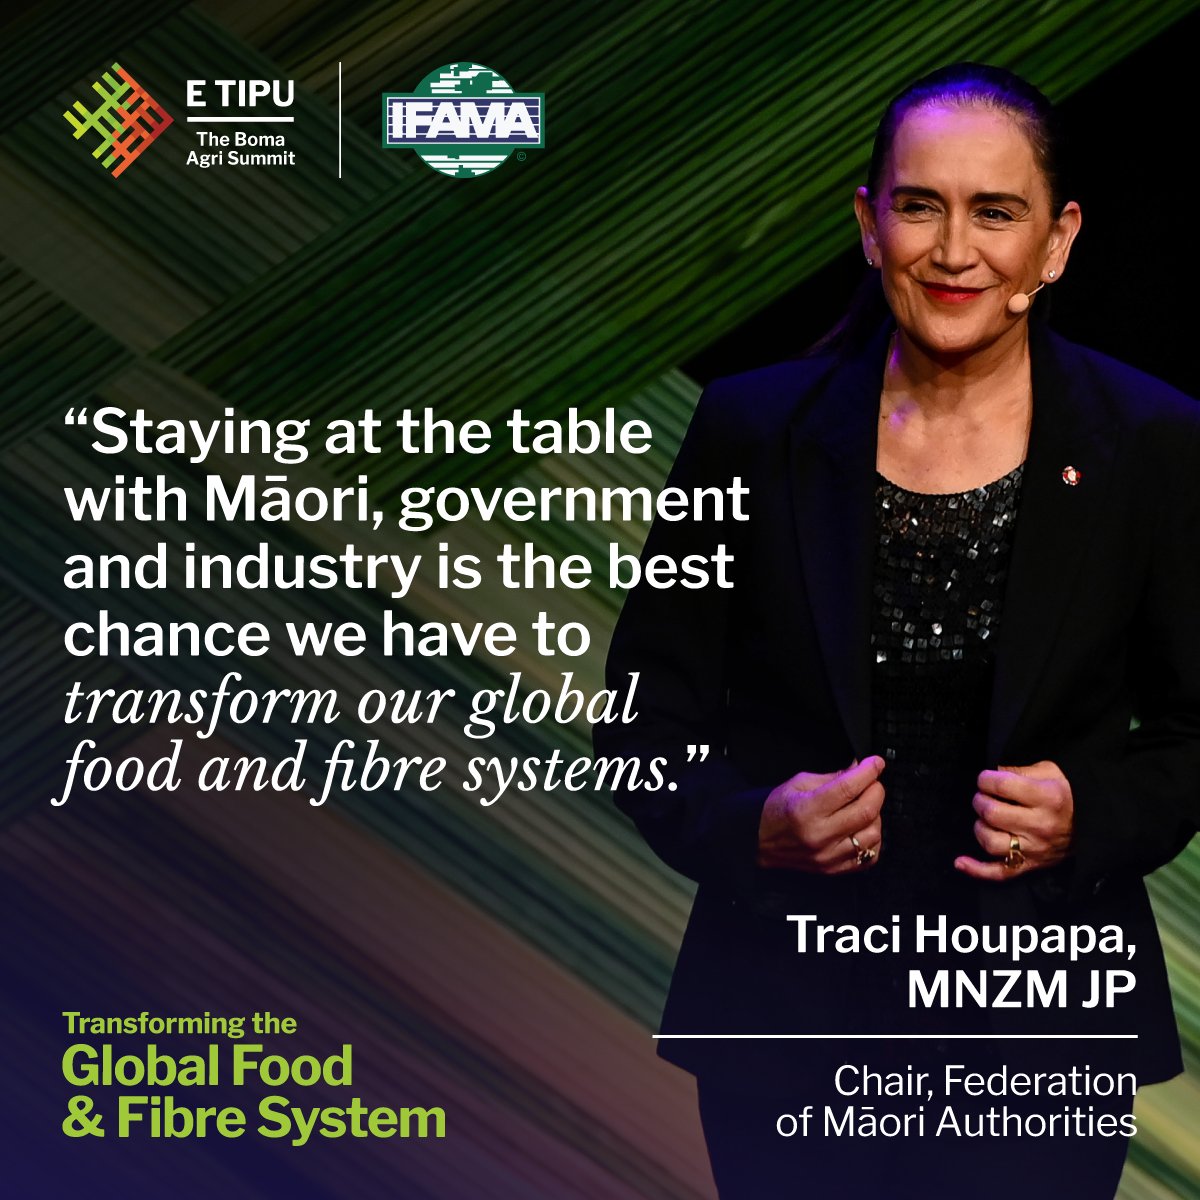 #ETipuIFAMA2023 SPEAKER HIGHLIGHT: @TraciHoupapa, Chair of @FederationMaori on how we can adapt our #leadership and lifestyles to balance economic development with environmental #sustainability. #ETipuIFAMA2023 #BomaNZ #Agribusiness #AgChatNZ @IFAMAIntl #NZAgri